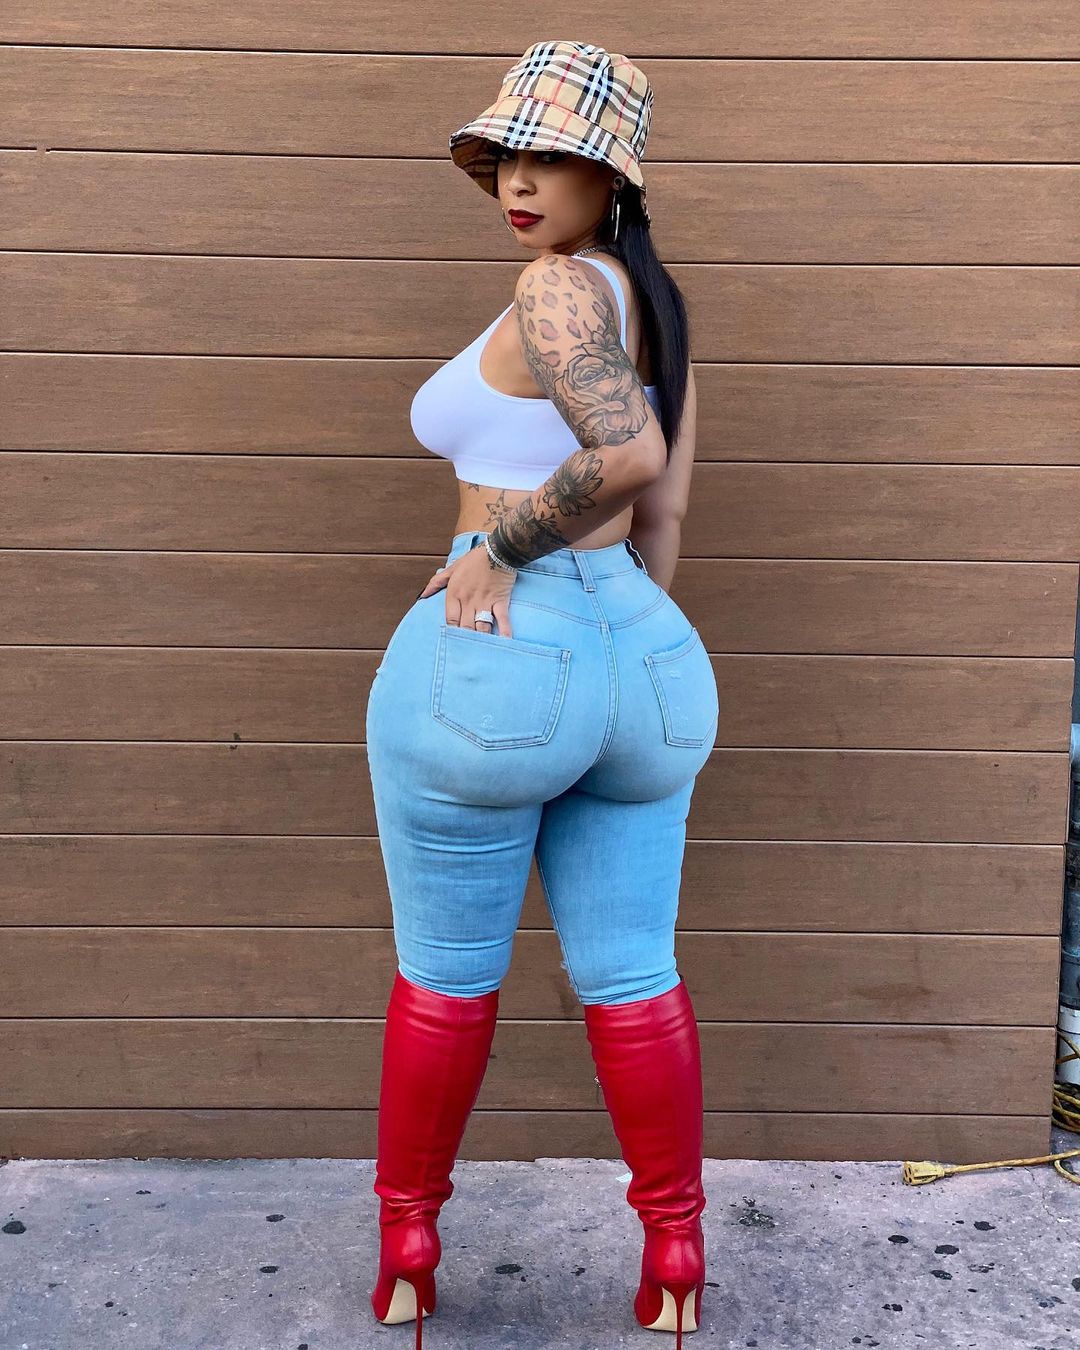 Ms thickness instagram